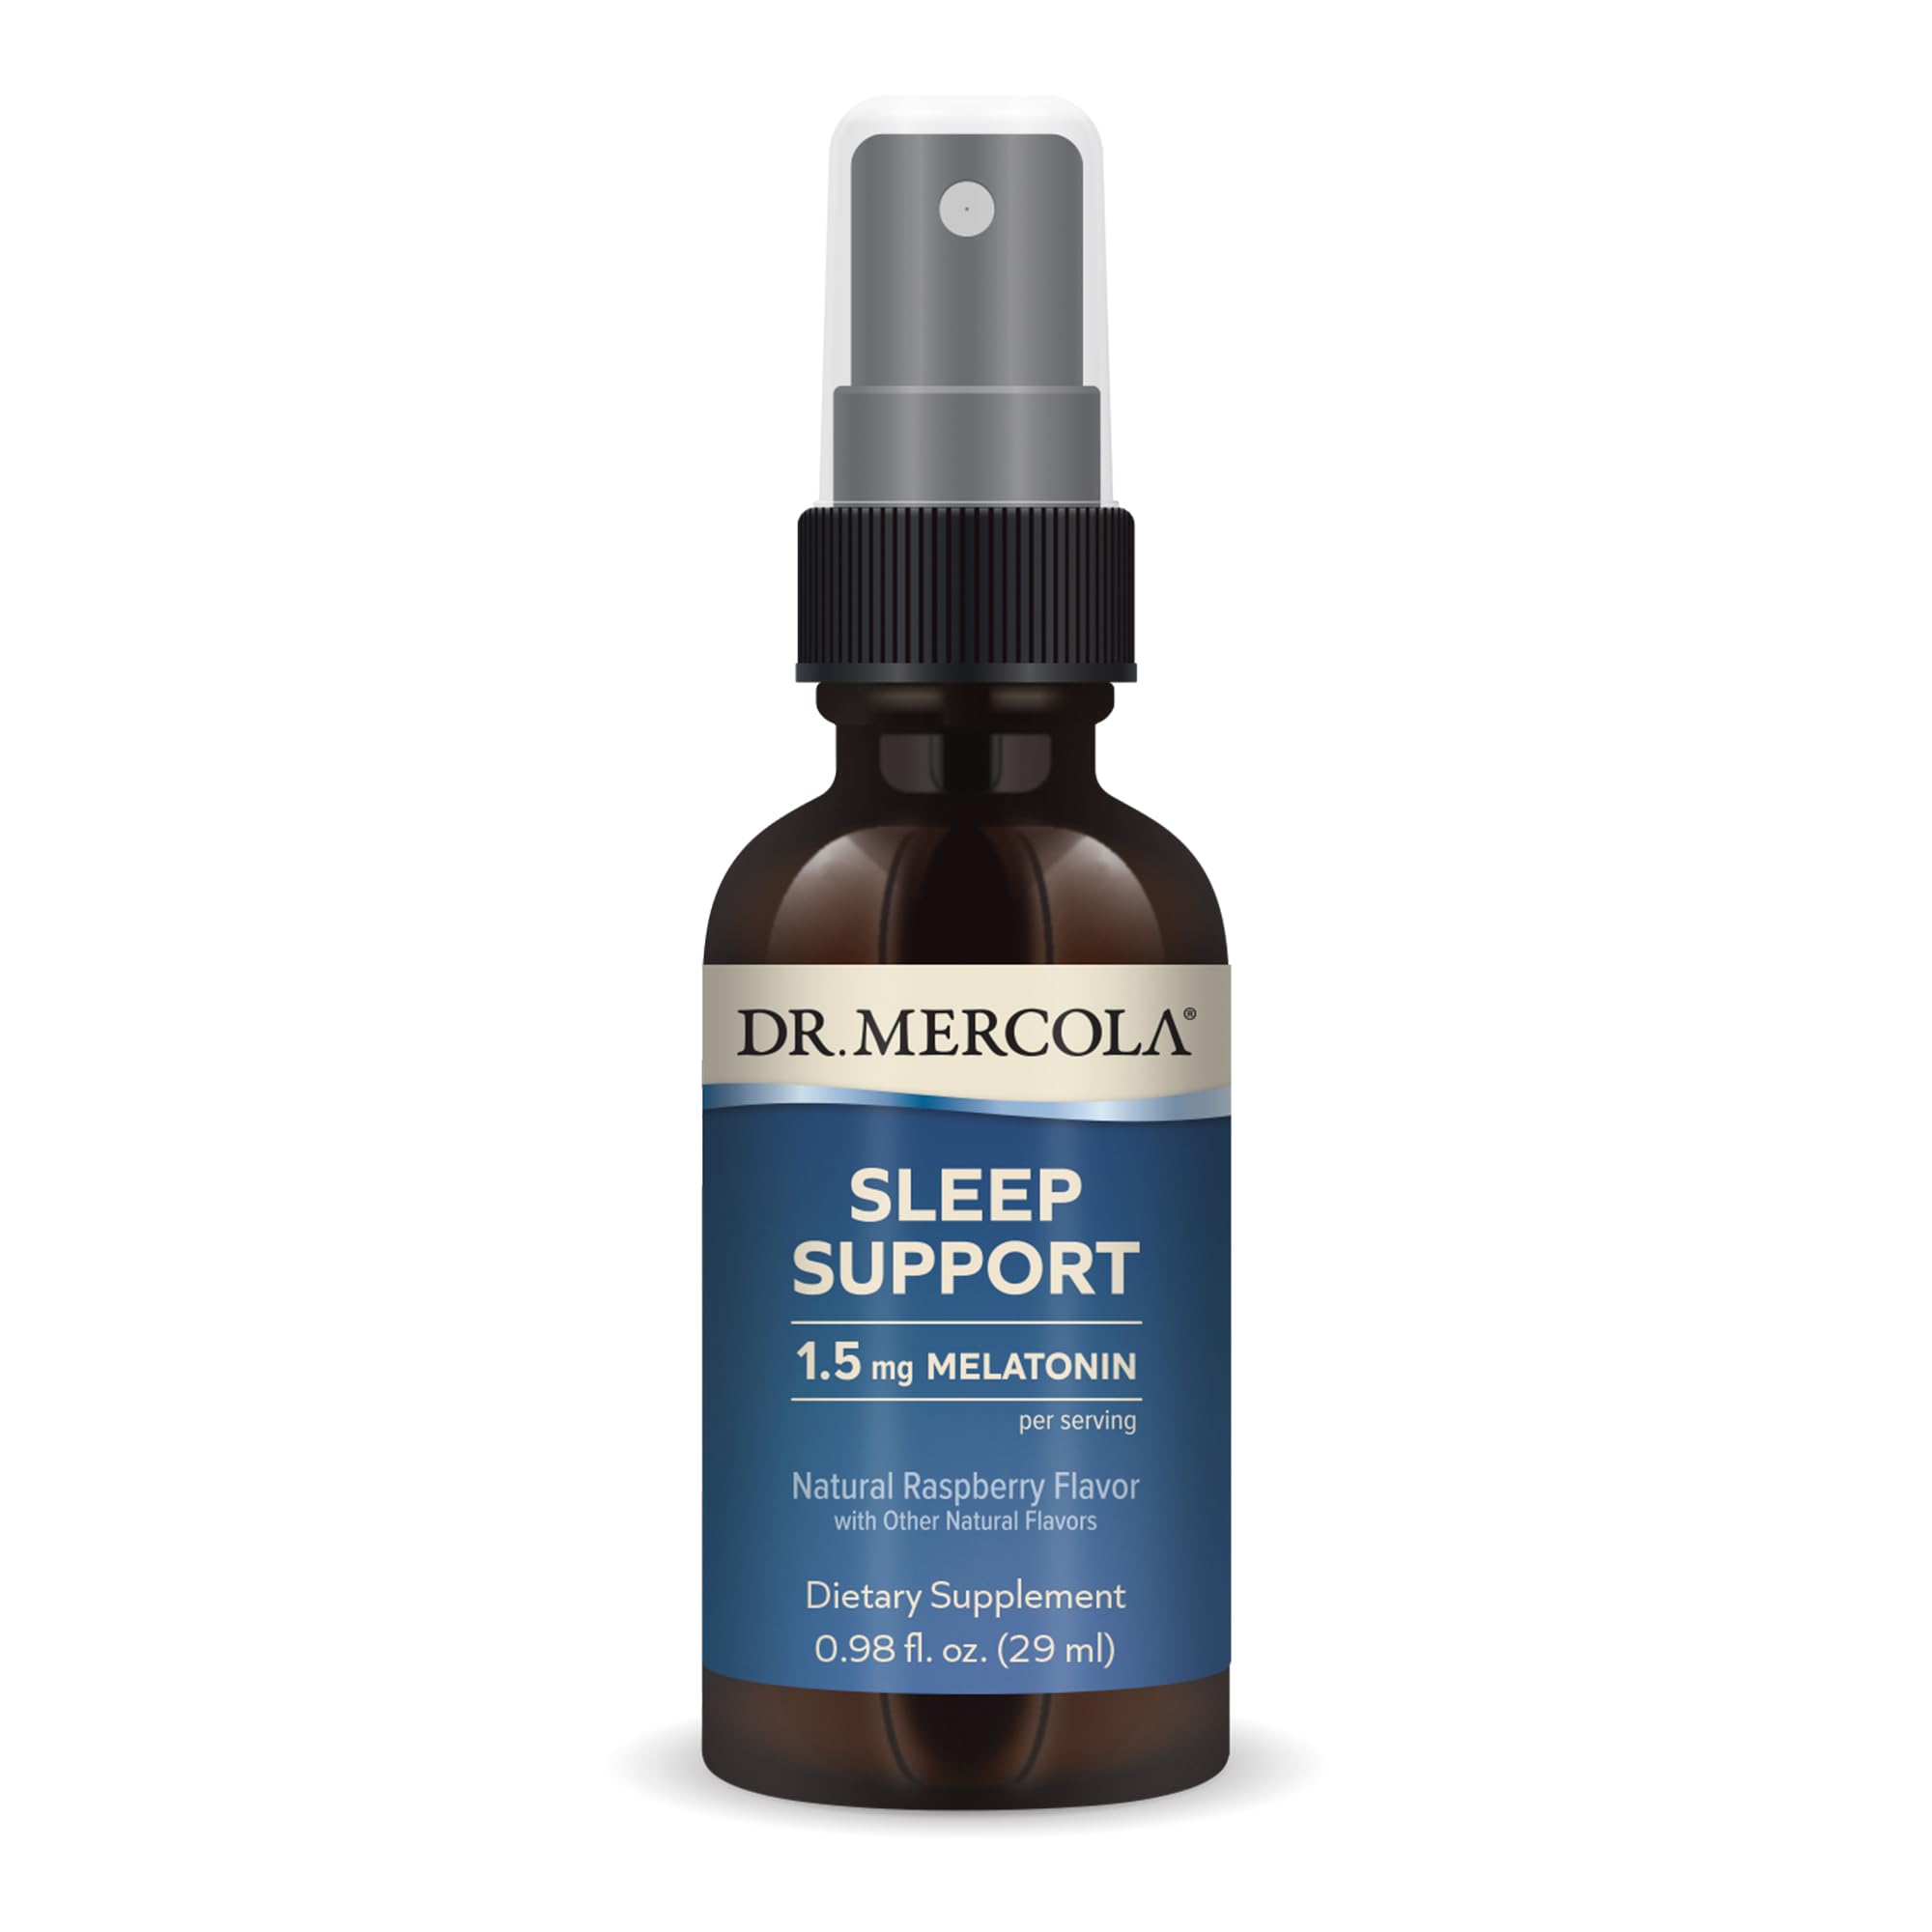 Dr. Mercola Sleep Support with Melatonin Spray, 1.5 mg Melatonin Per Serving, 35 Servings, Dietary Supplement, Supports Healthy 